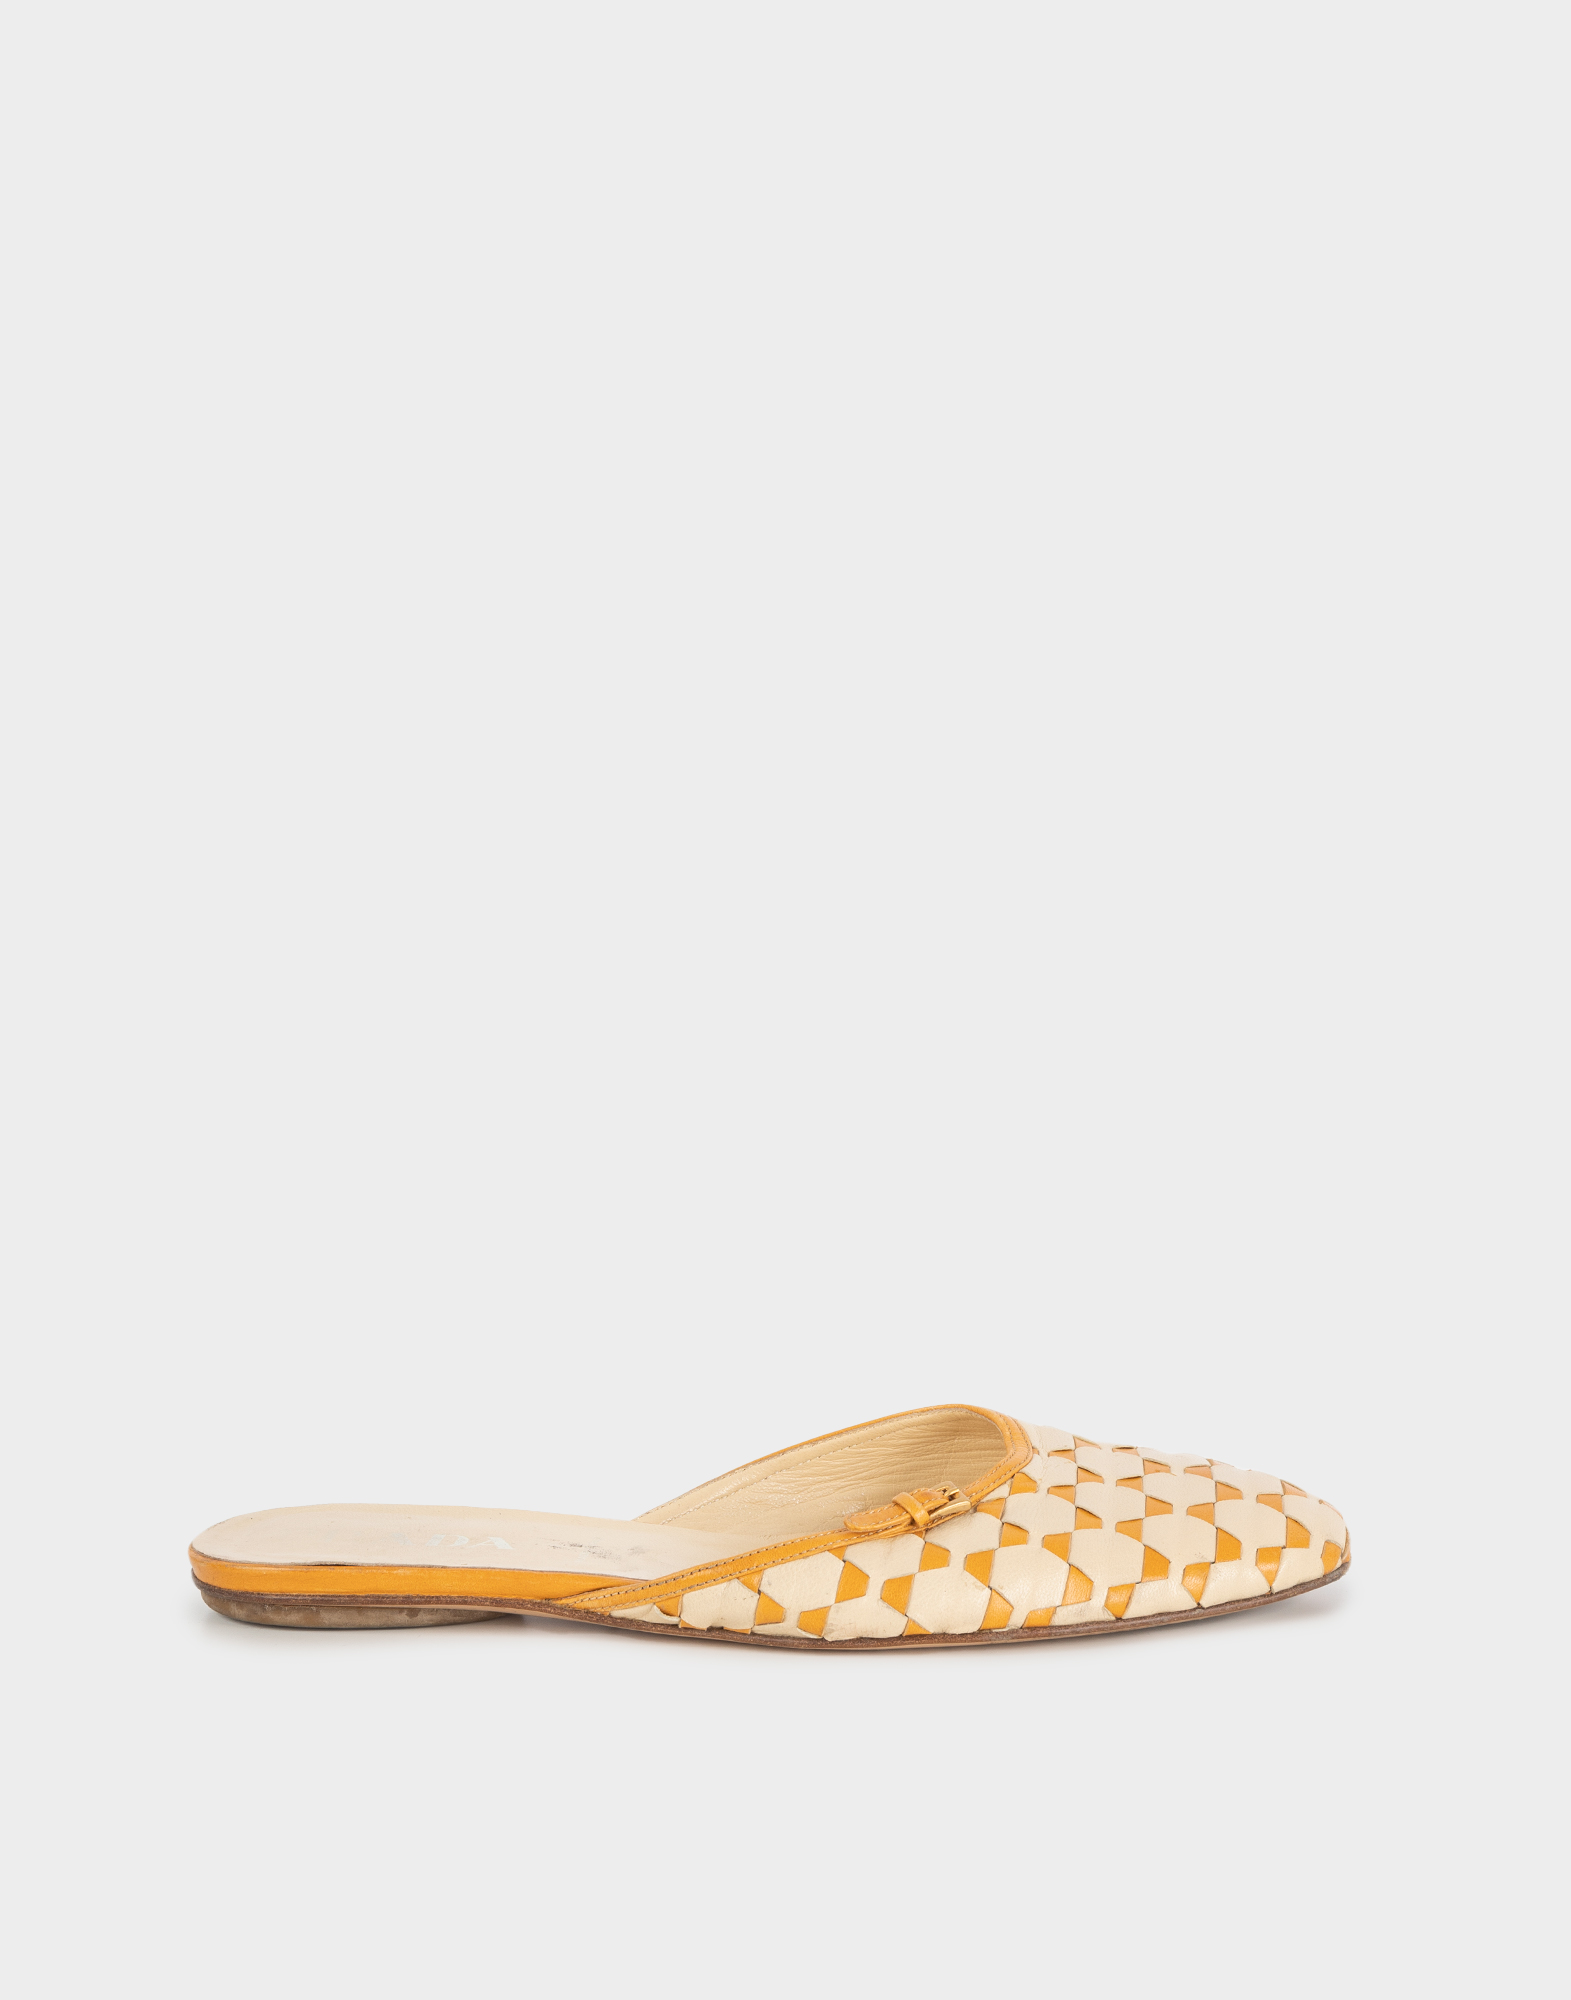 beige and orange low leather women's slippers with small golden buckle